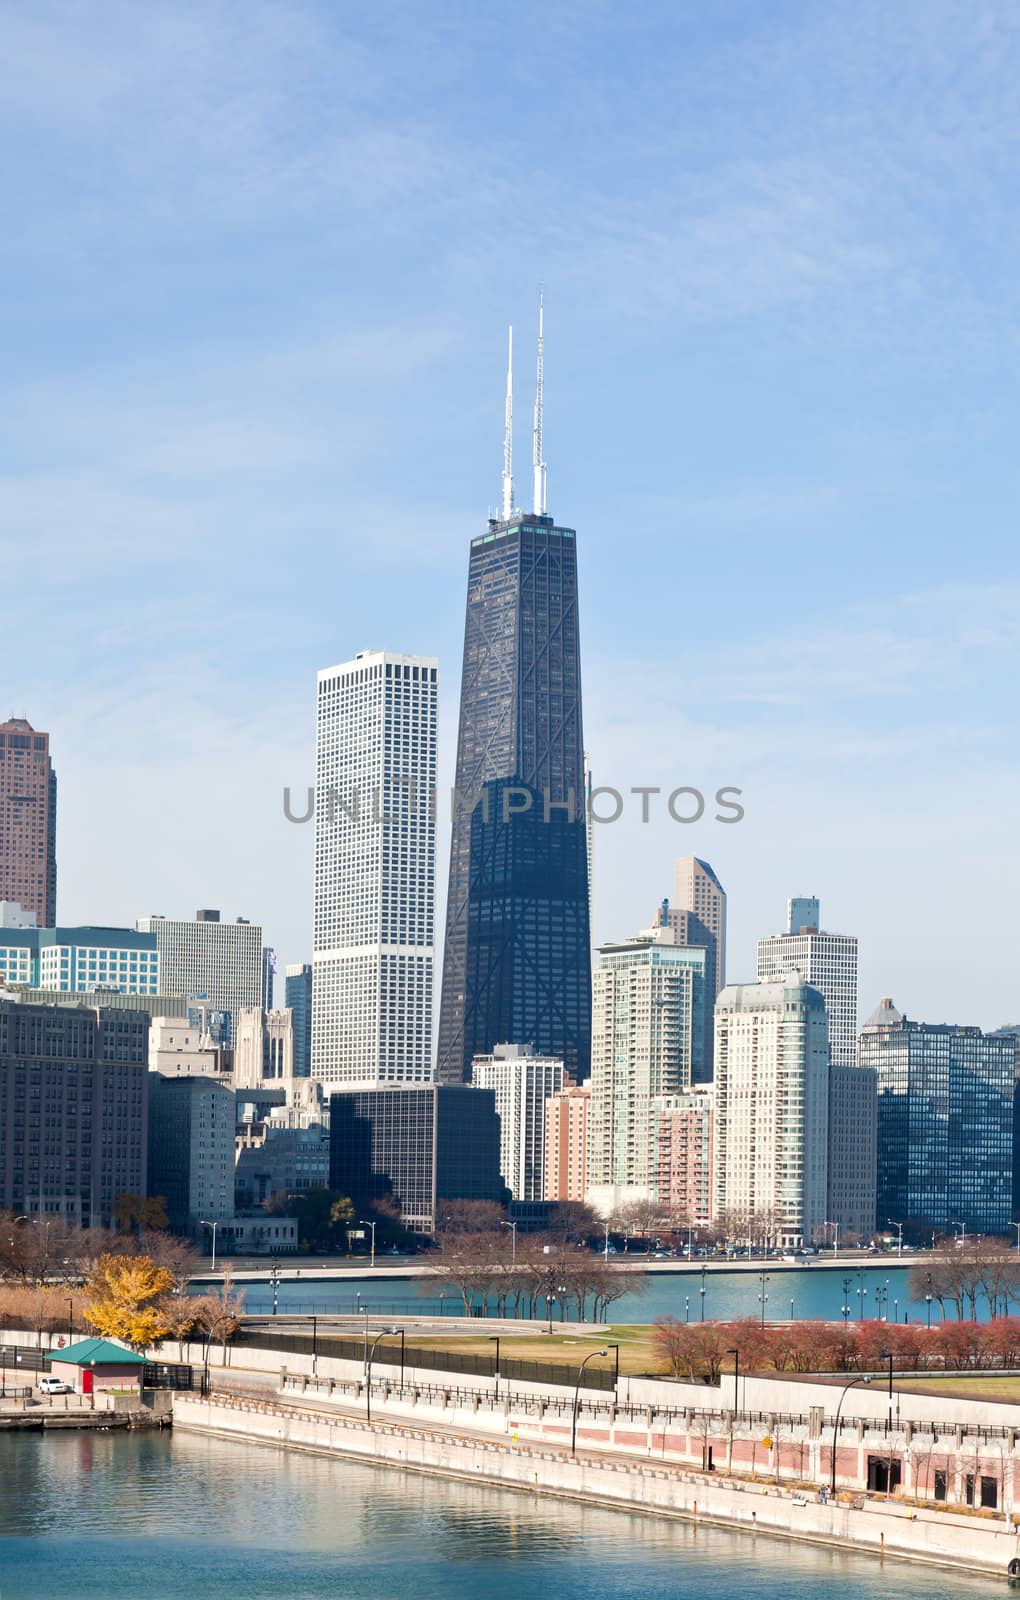 The Chicago Skyline by gary718